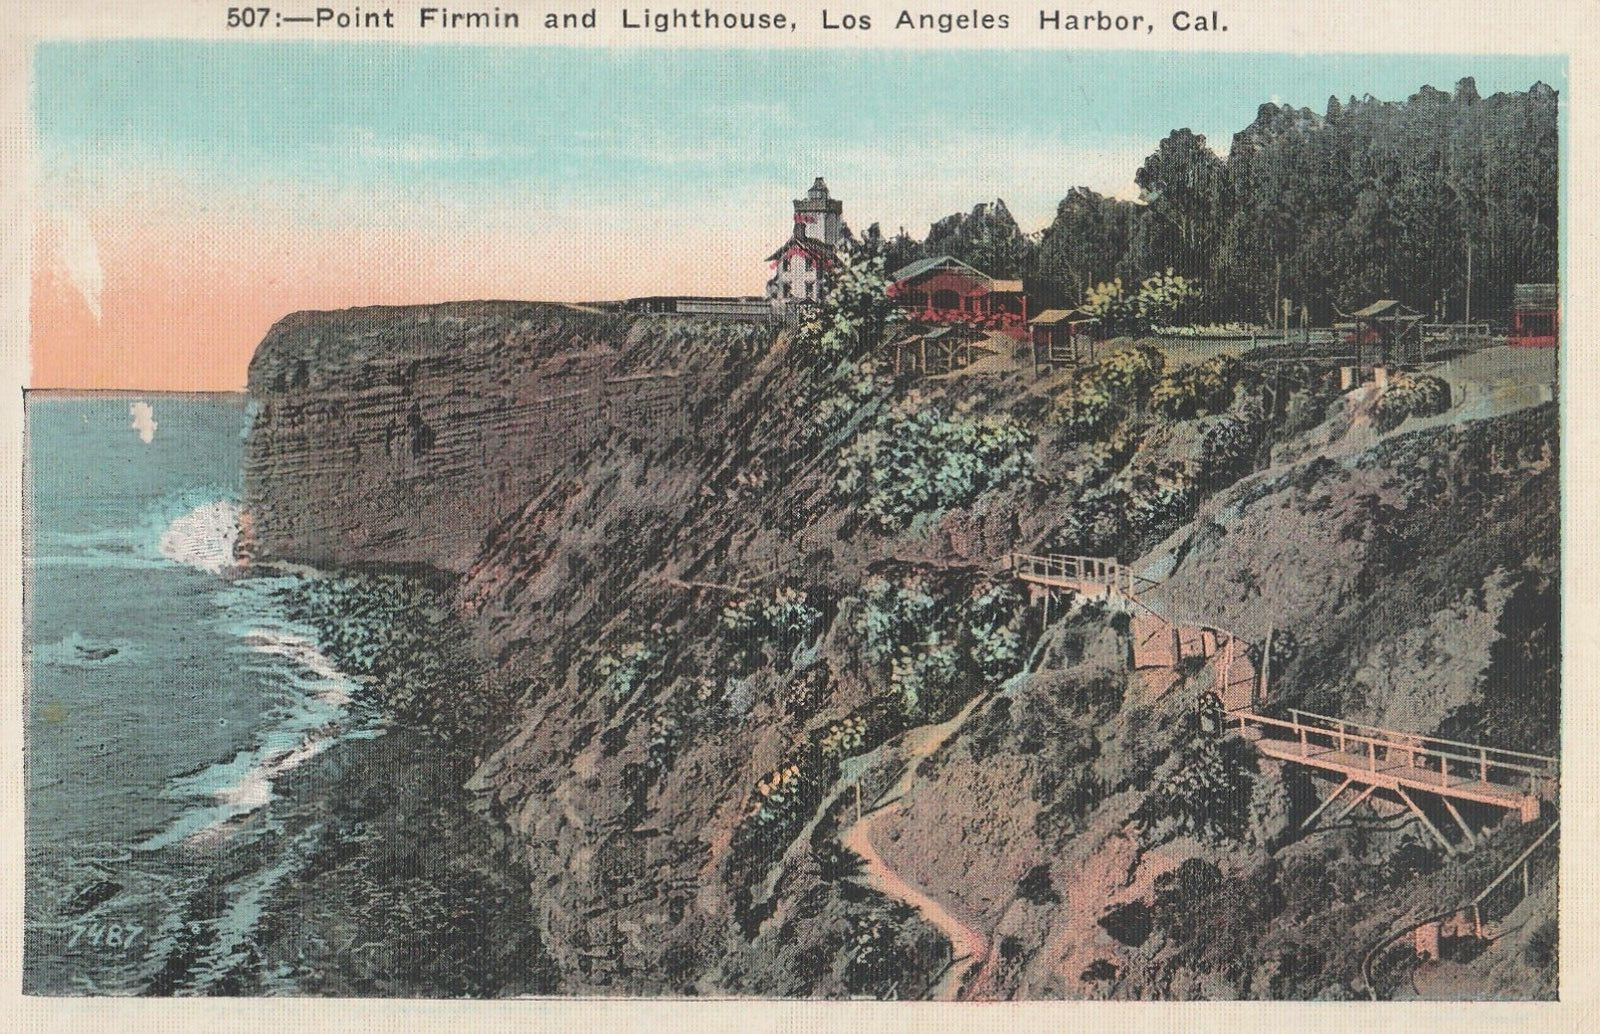 Los Angeles Harbor, Cal., CALIFORNIA, Point Firmin and Lighthouse